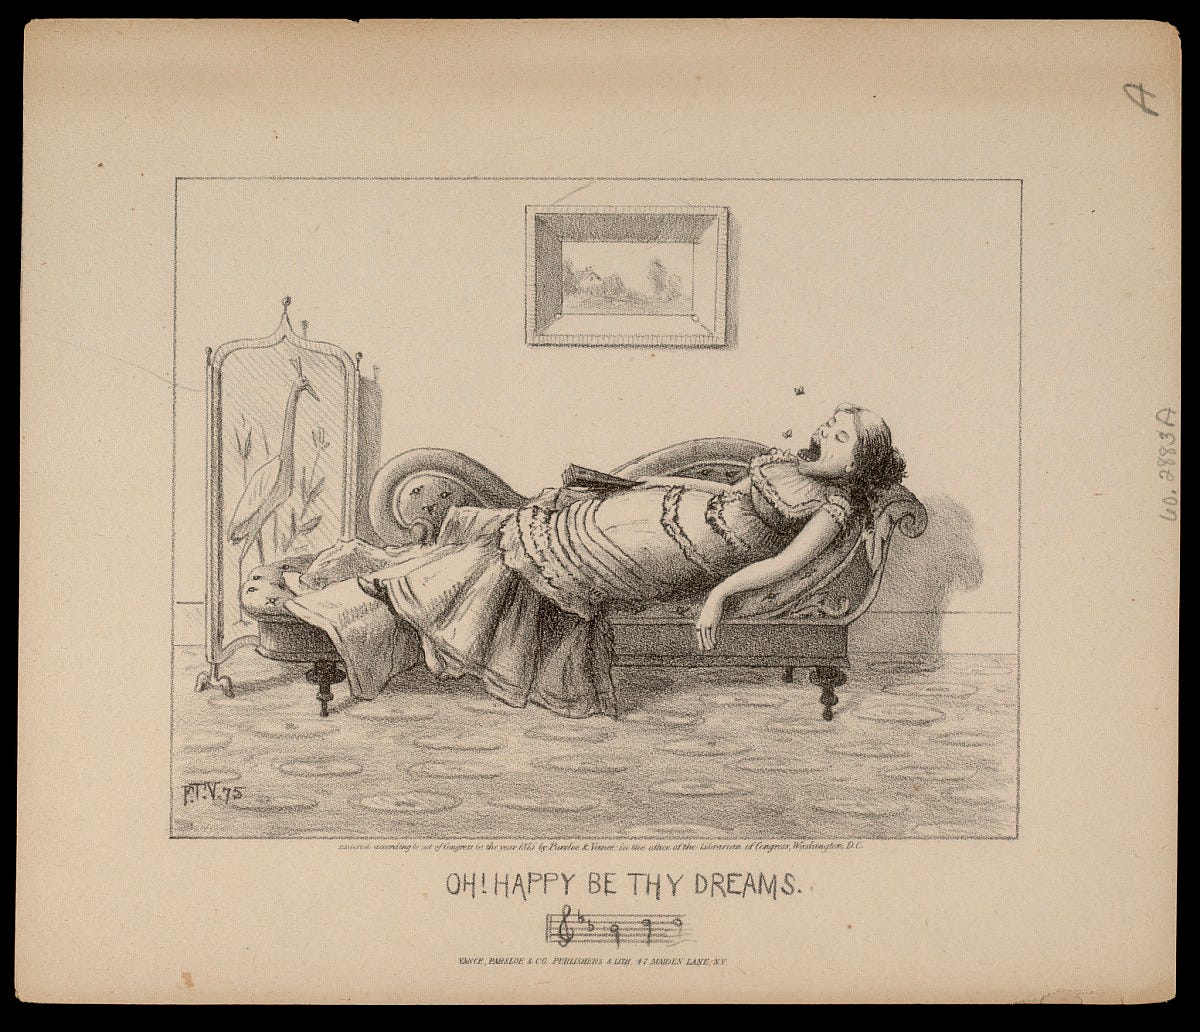 Black and white comic print of a woman sleeping on the couch with mouth wide open. Two insects are flying around her mouth. A bar of music appears below the title. This is one of over 100 in a series of comic parodies of popular songs.